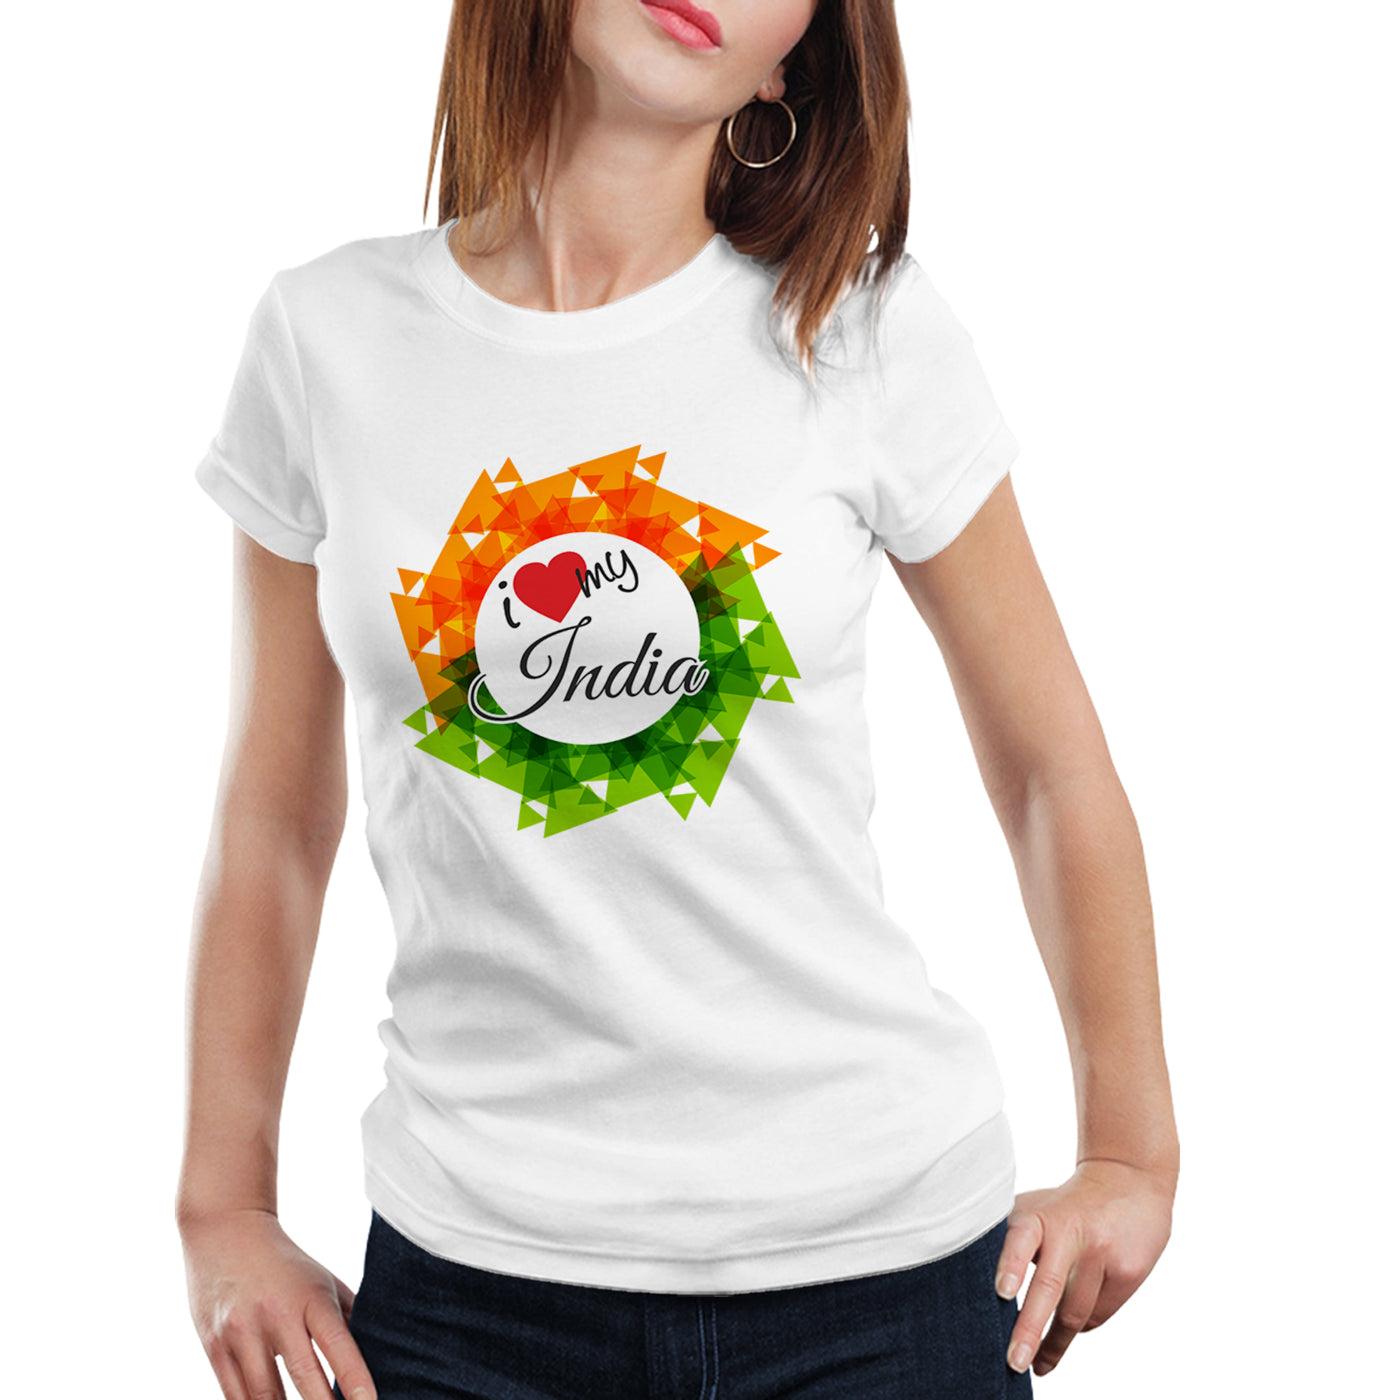 iberry's Independence day t shirt | Republic day t shirts |India t shirts |Patriotic tshirt |15 August t shirts |Round neck cotton tshirts -11